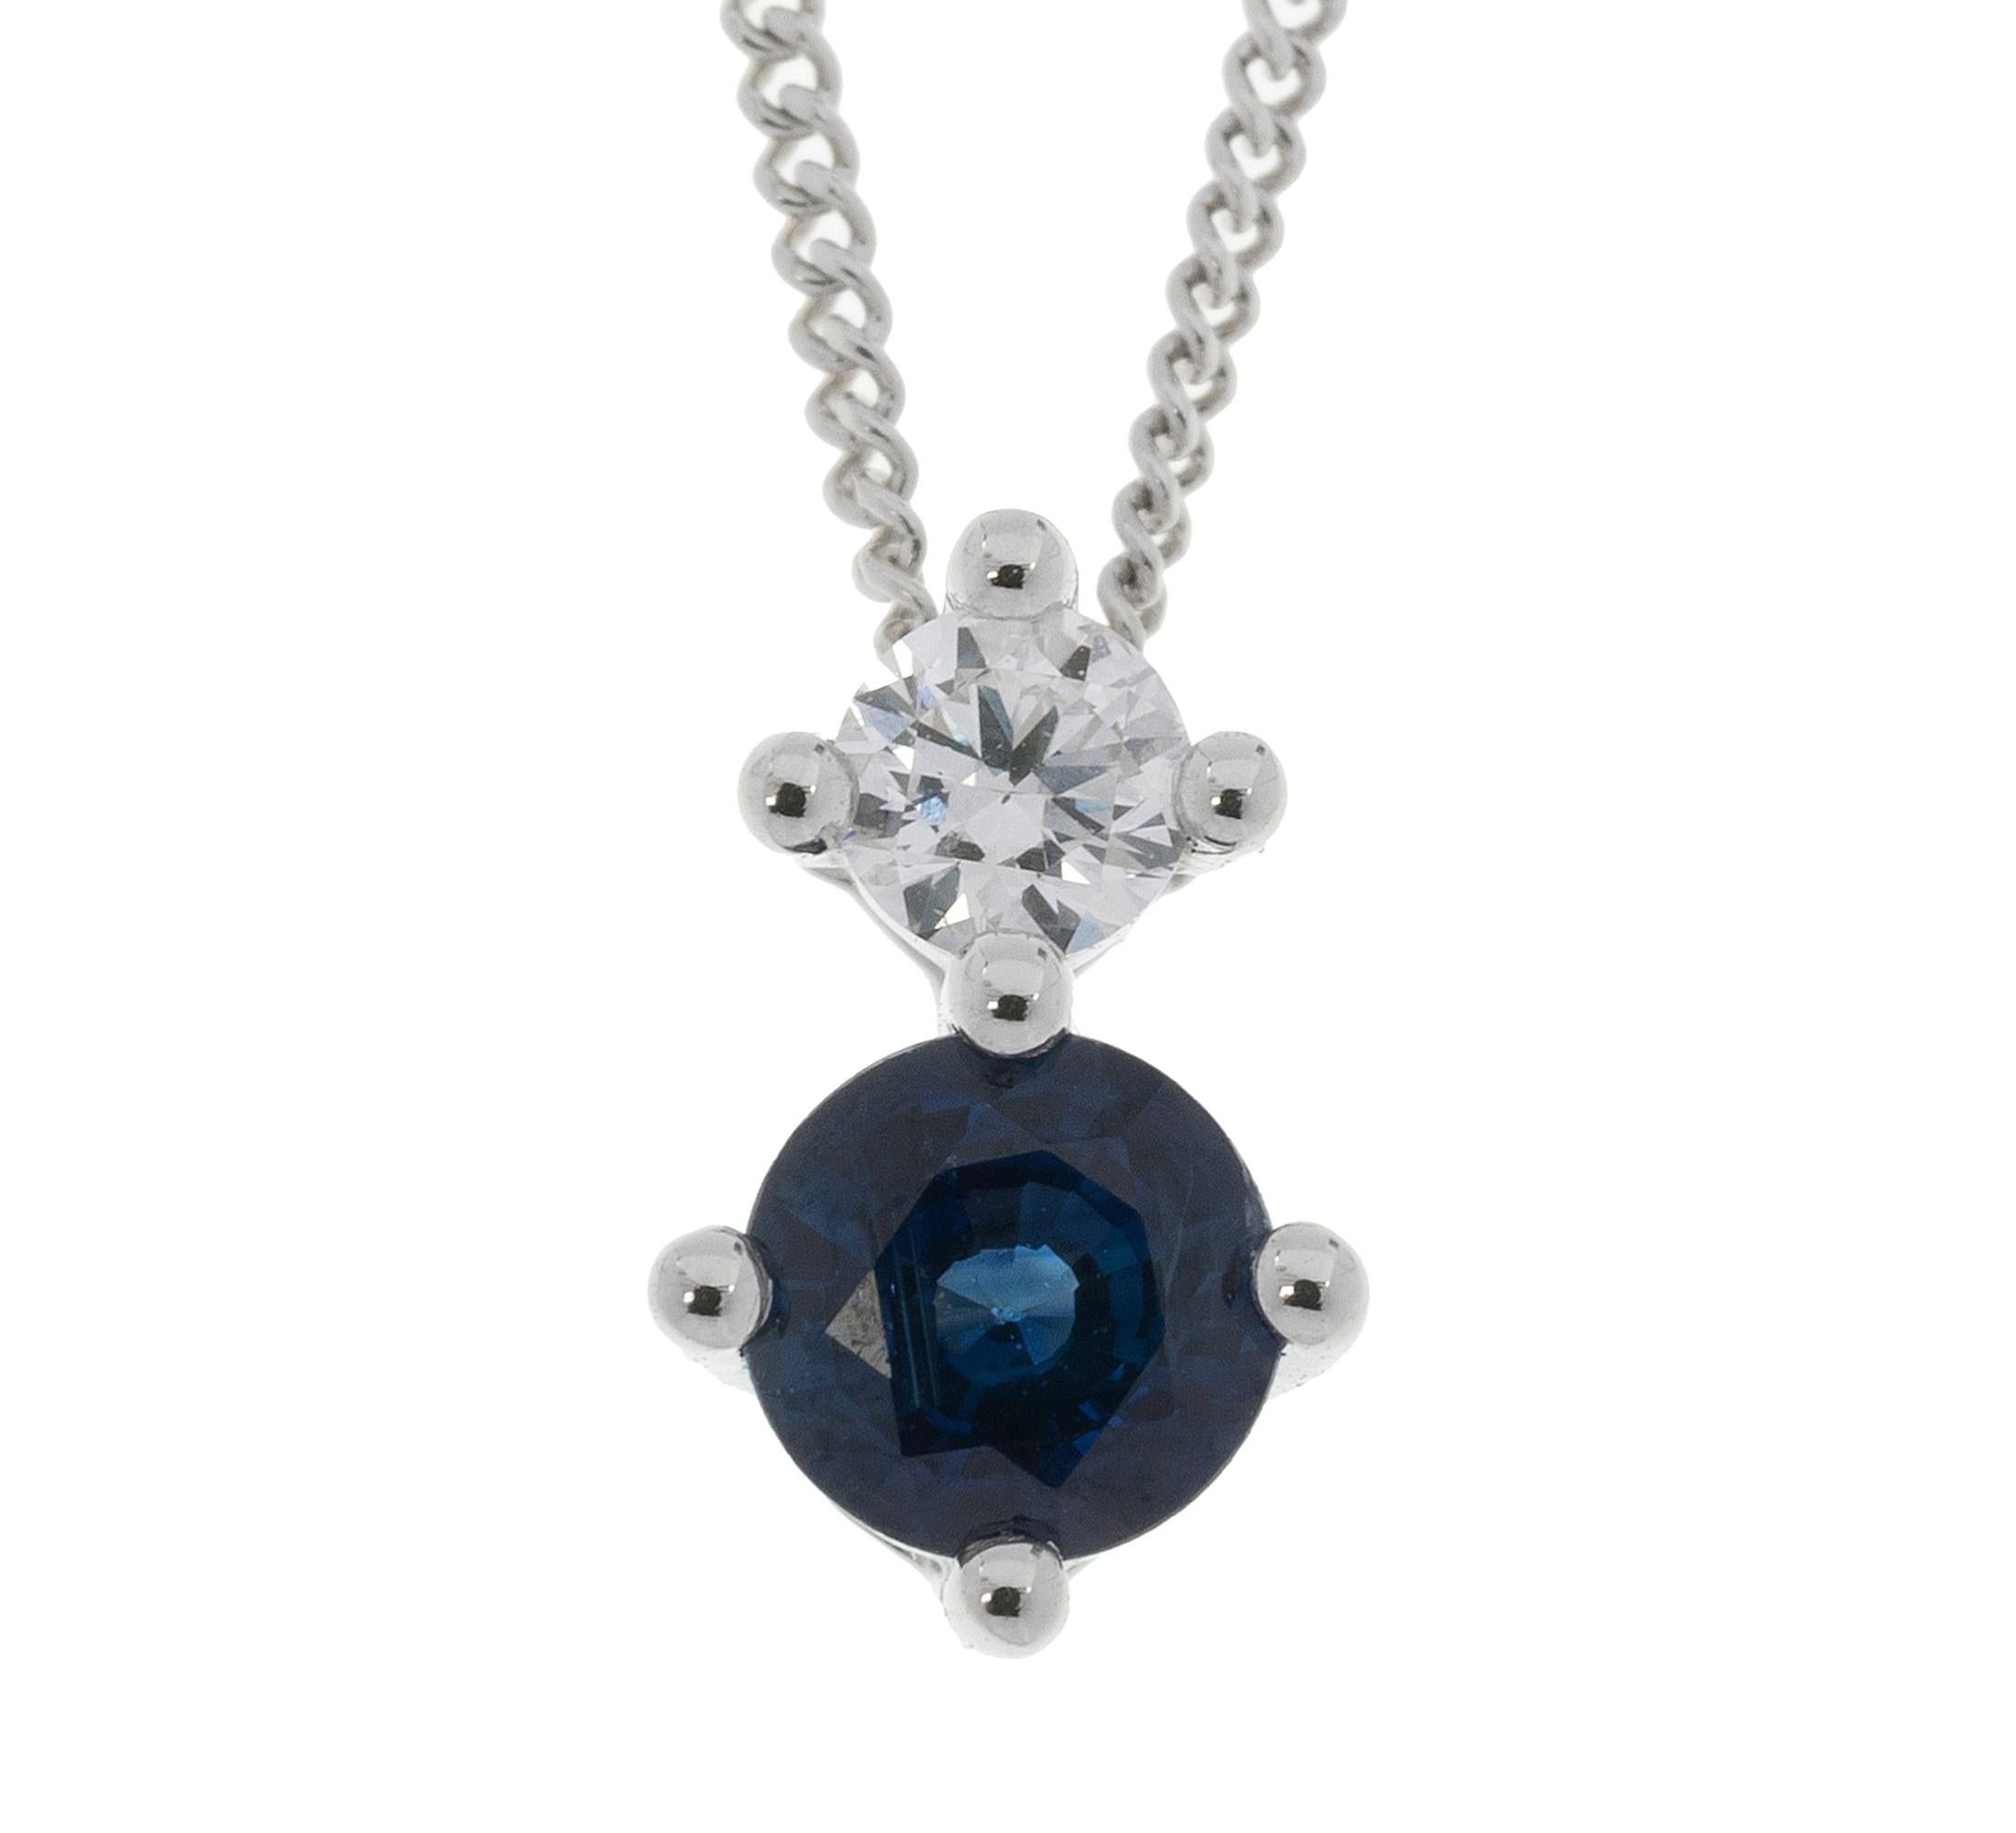 DESCRIPTION
This beautiful sapphire and diamond jewellery set,  a gorgeous gift for a September birthday.. or even for a bride's something blue! 

Both the pendant and earrings are featuring a gorgeous round sapphire, suspended from a twinkling